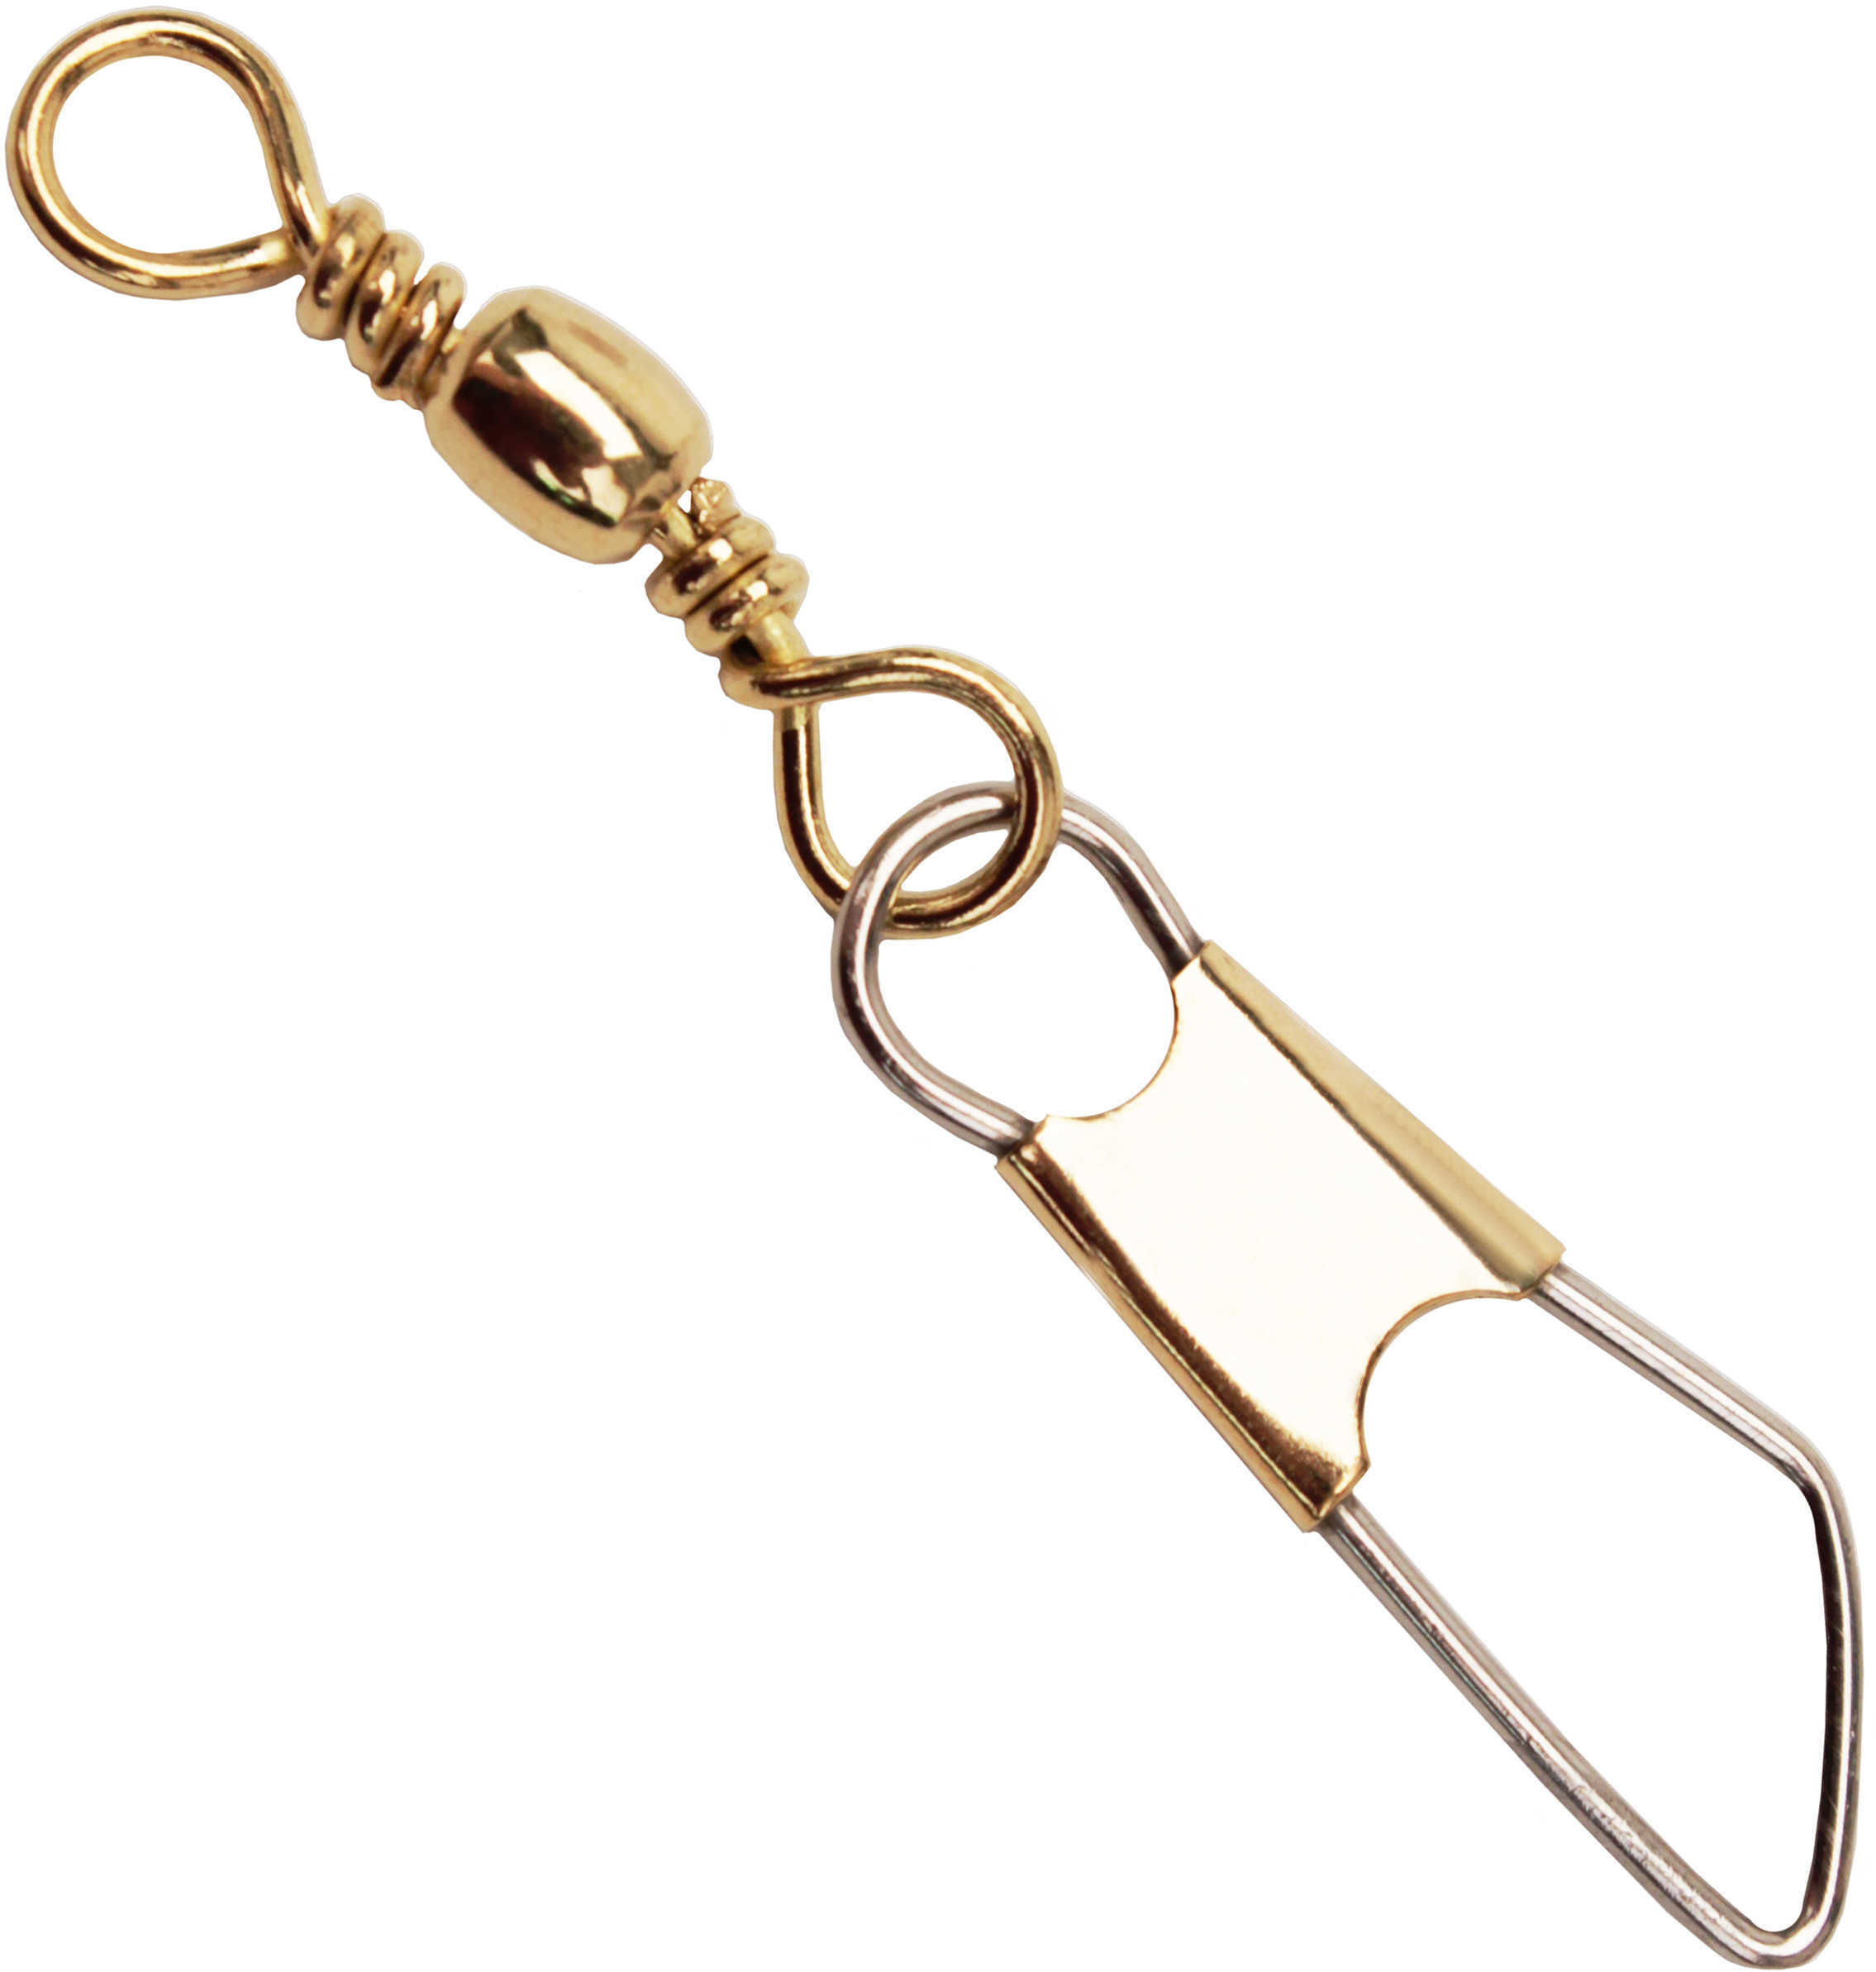 Eagle Claw Fishing Tackle Snap Swivel Brass Size12 7Pk 01041-012